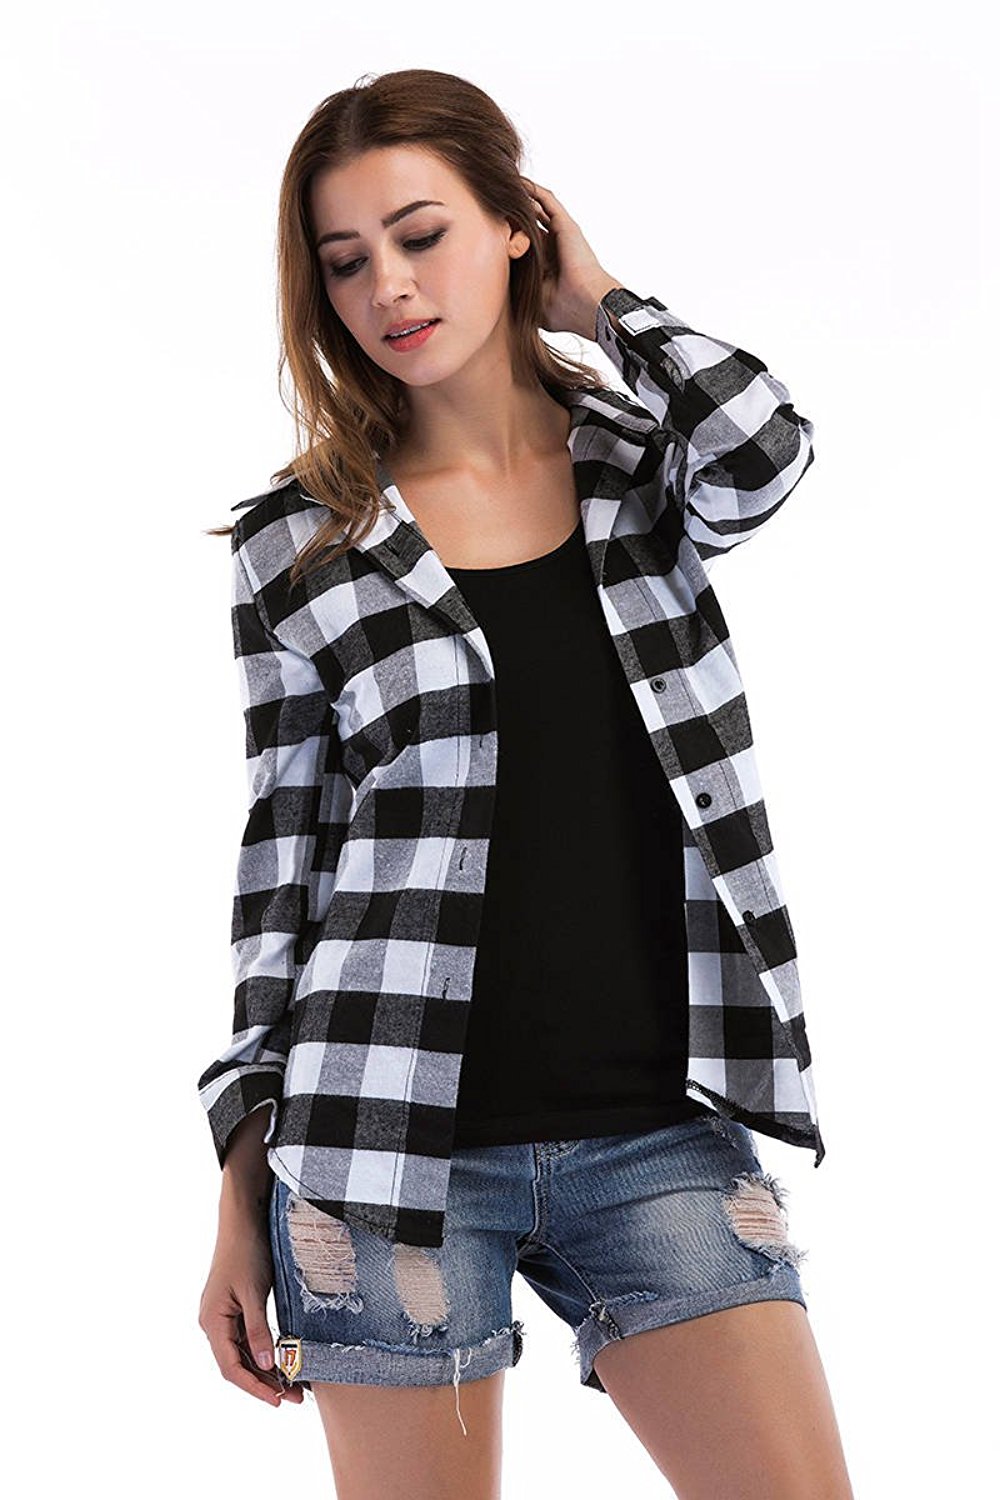 Buy Rosella Cotton Black and White Check Shirt for women Online @ ₹799 ...